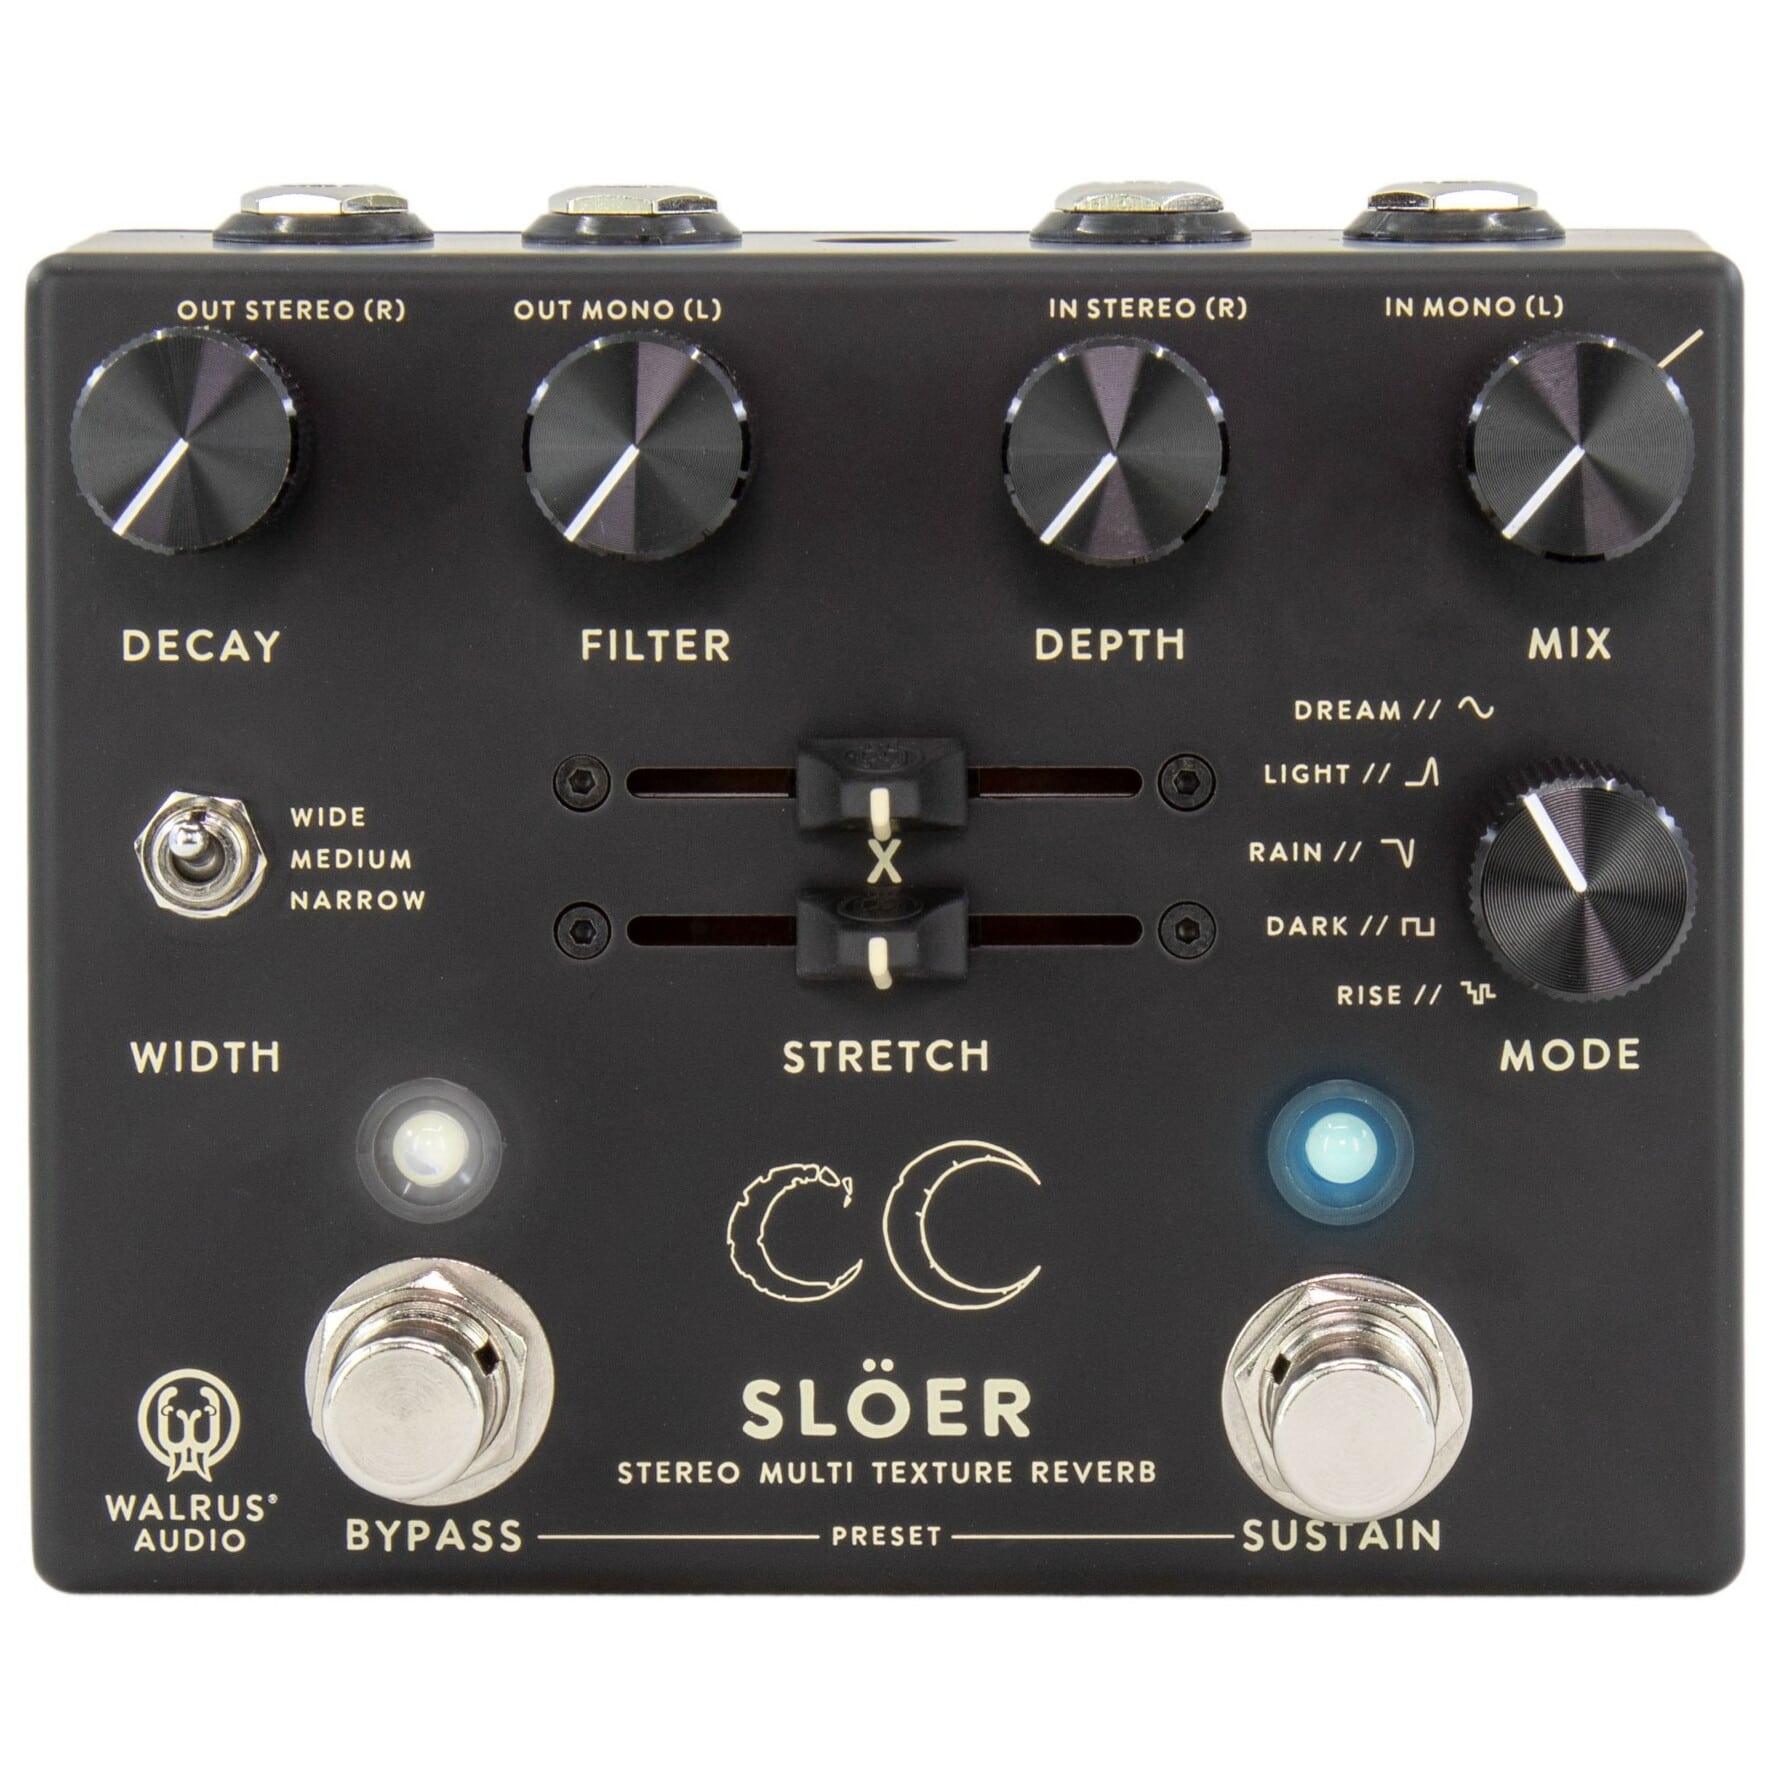 Walrus Audio Sloer Black Stereo Ambient Reverb Pedal 1